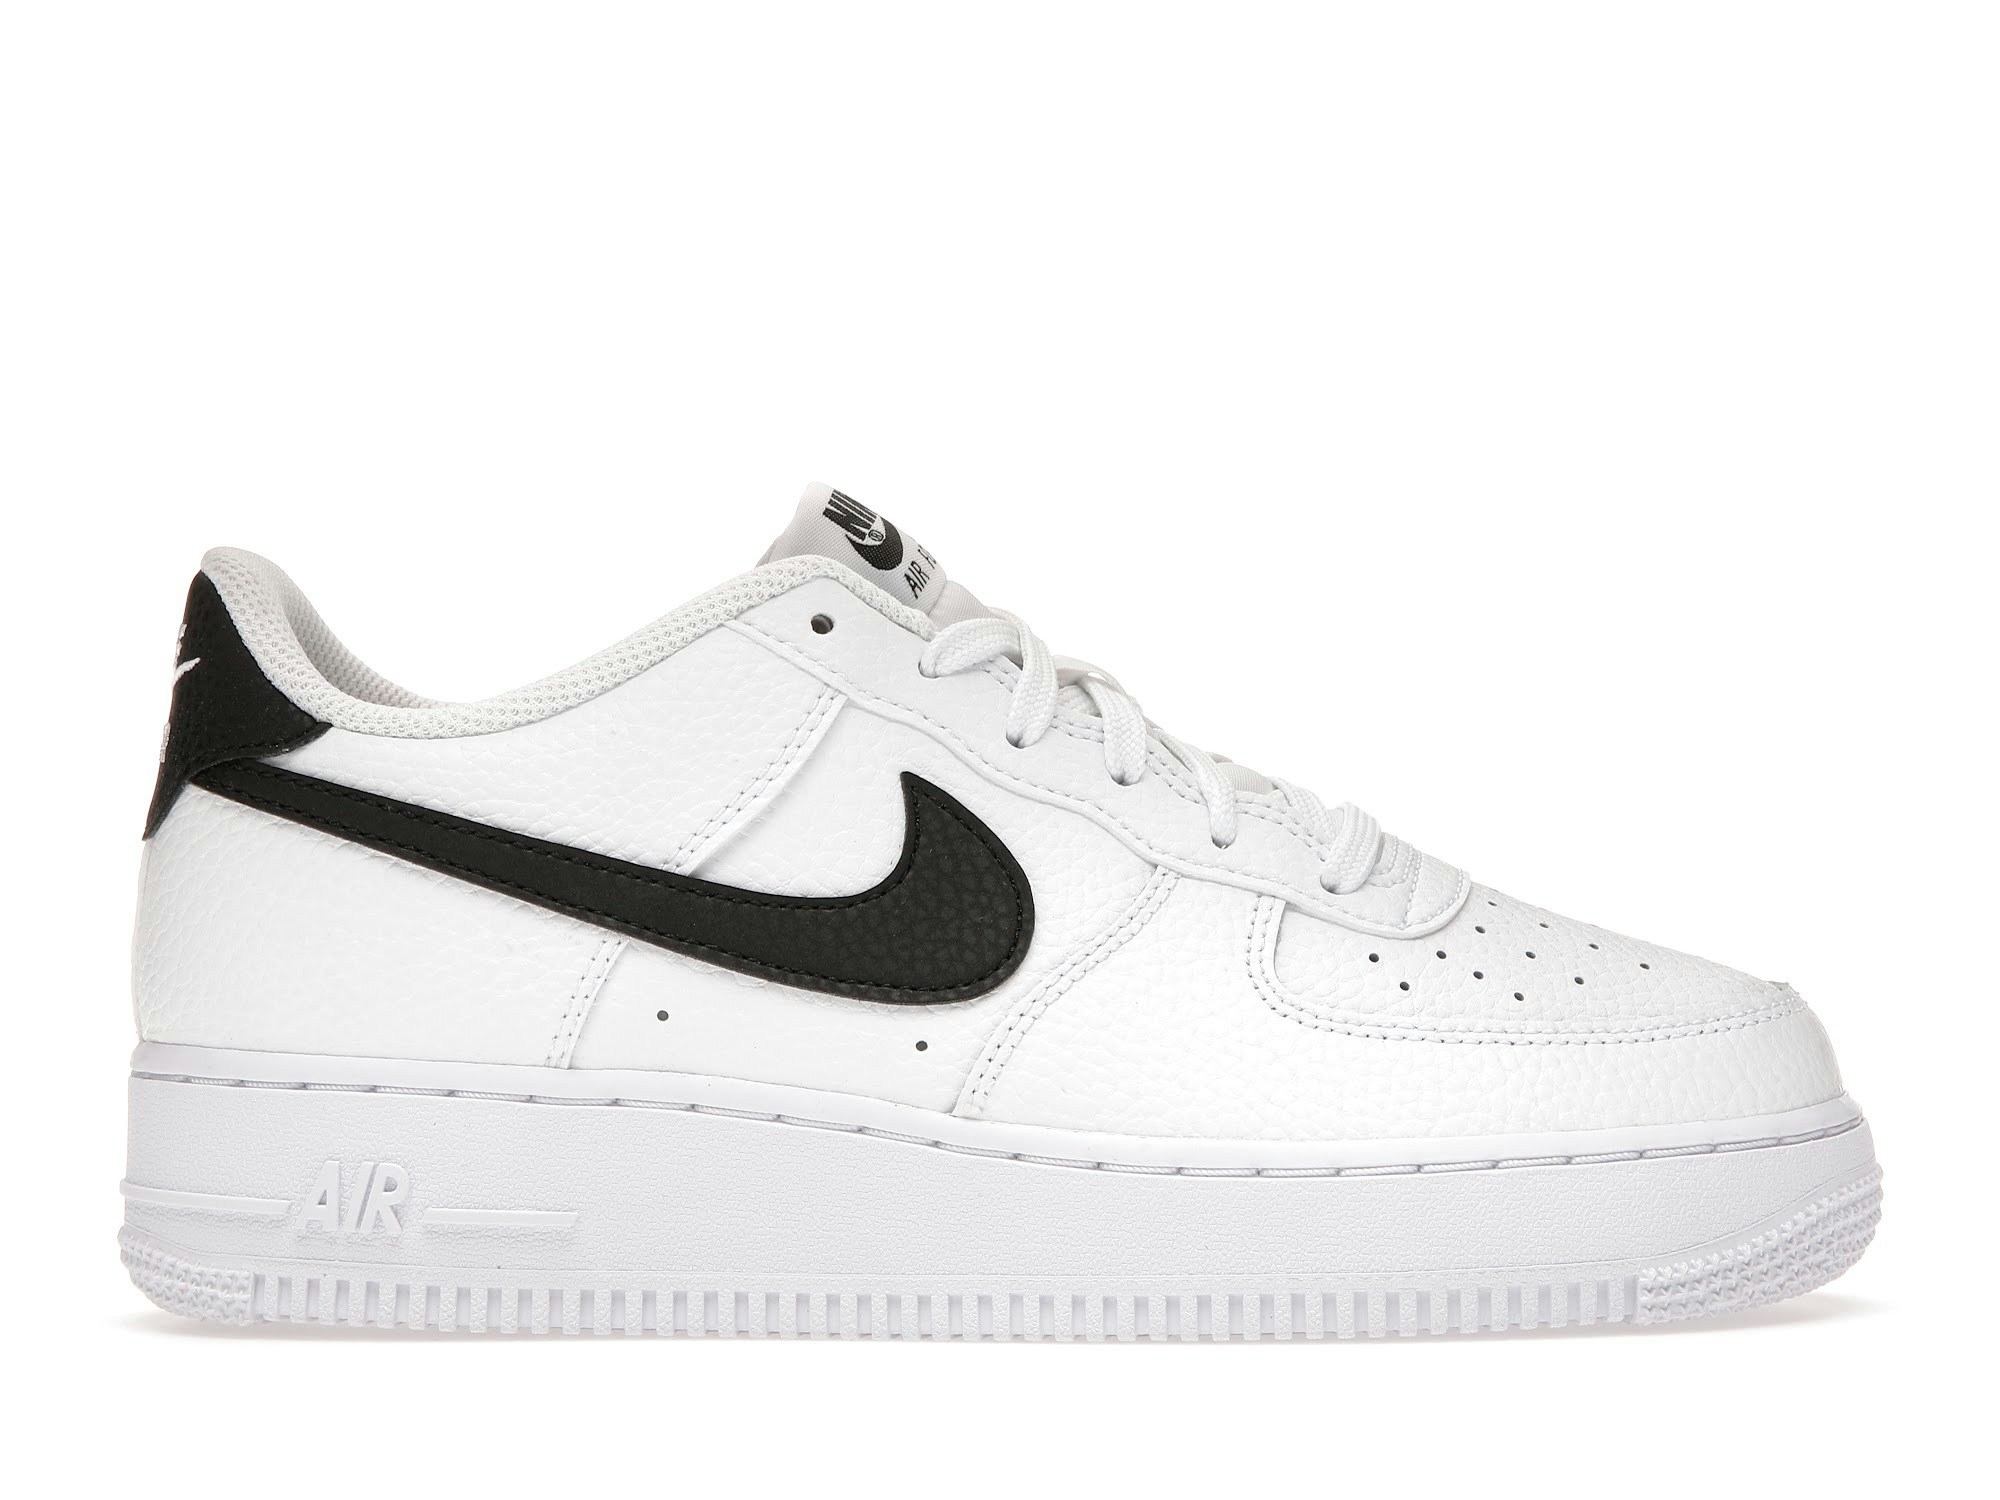 Nike Air Force 1 Low White Black (GS) - CT3839-100